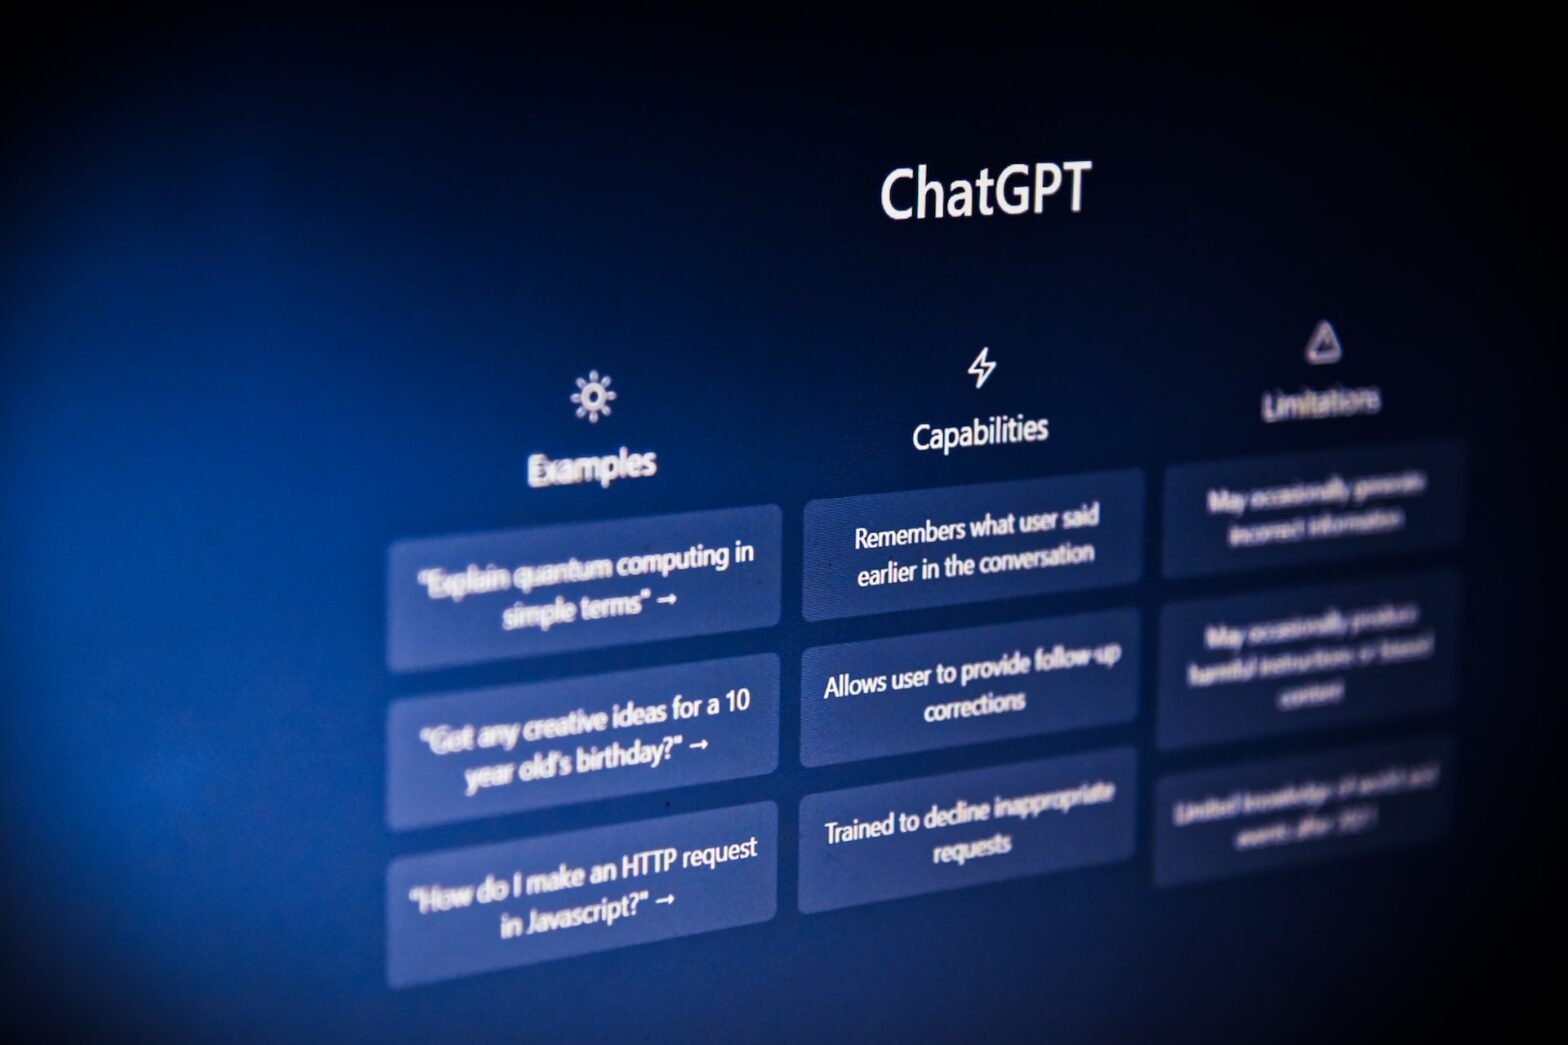 Partial screen shot of ChatGPT user interface.